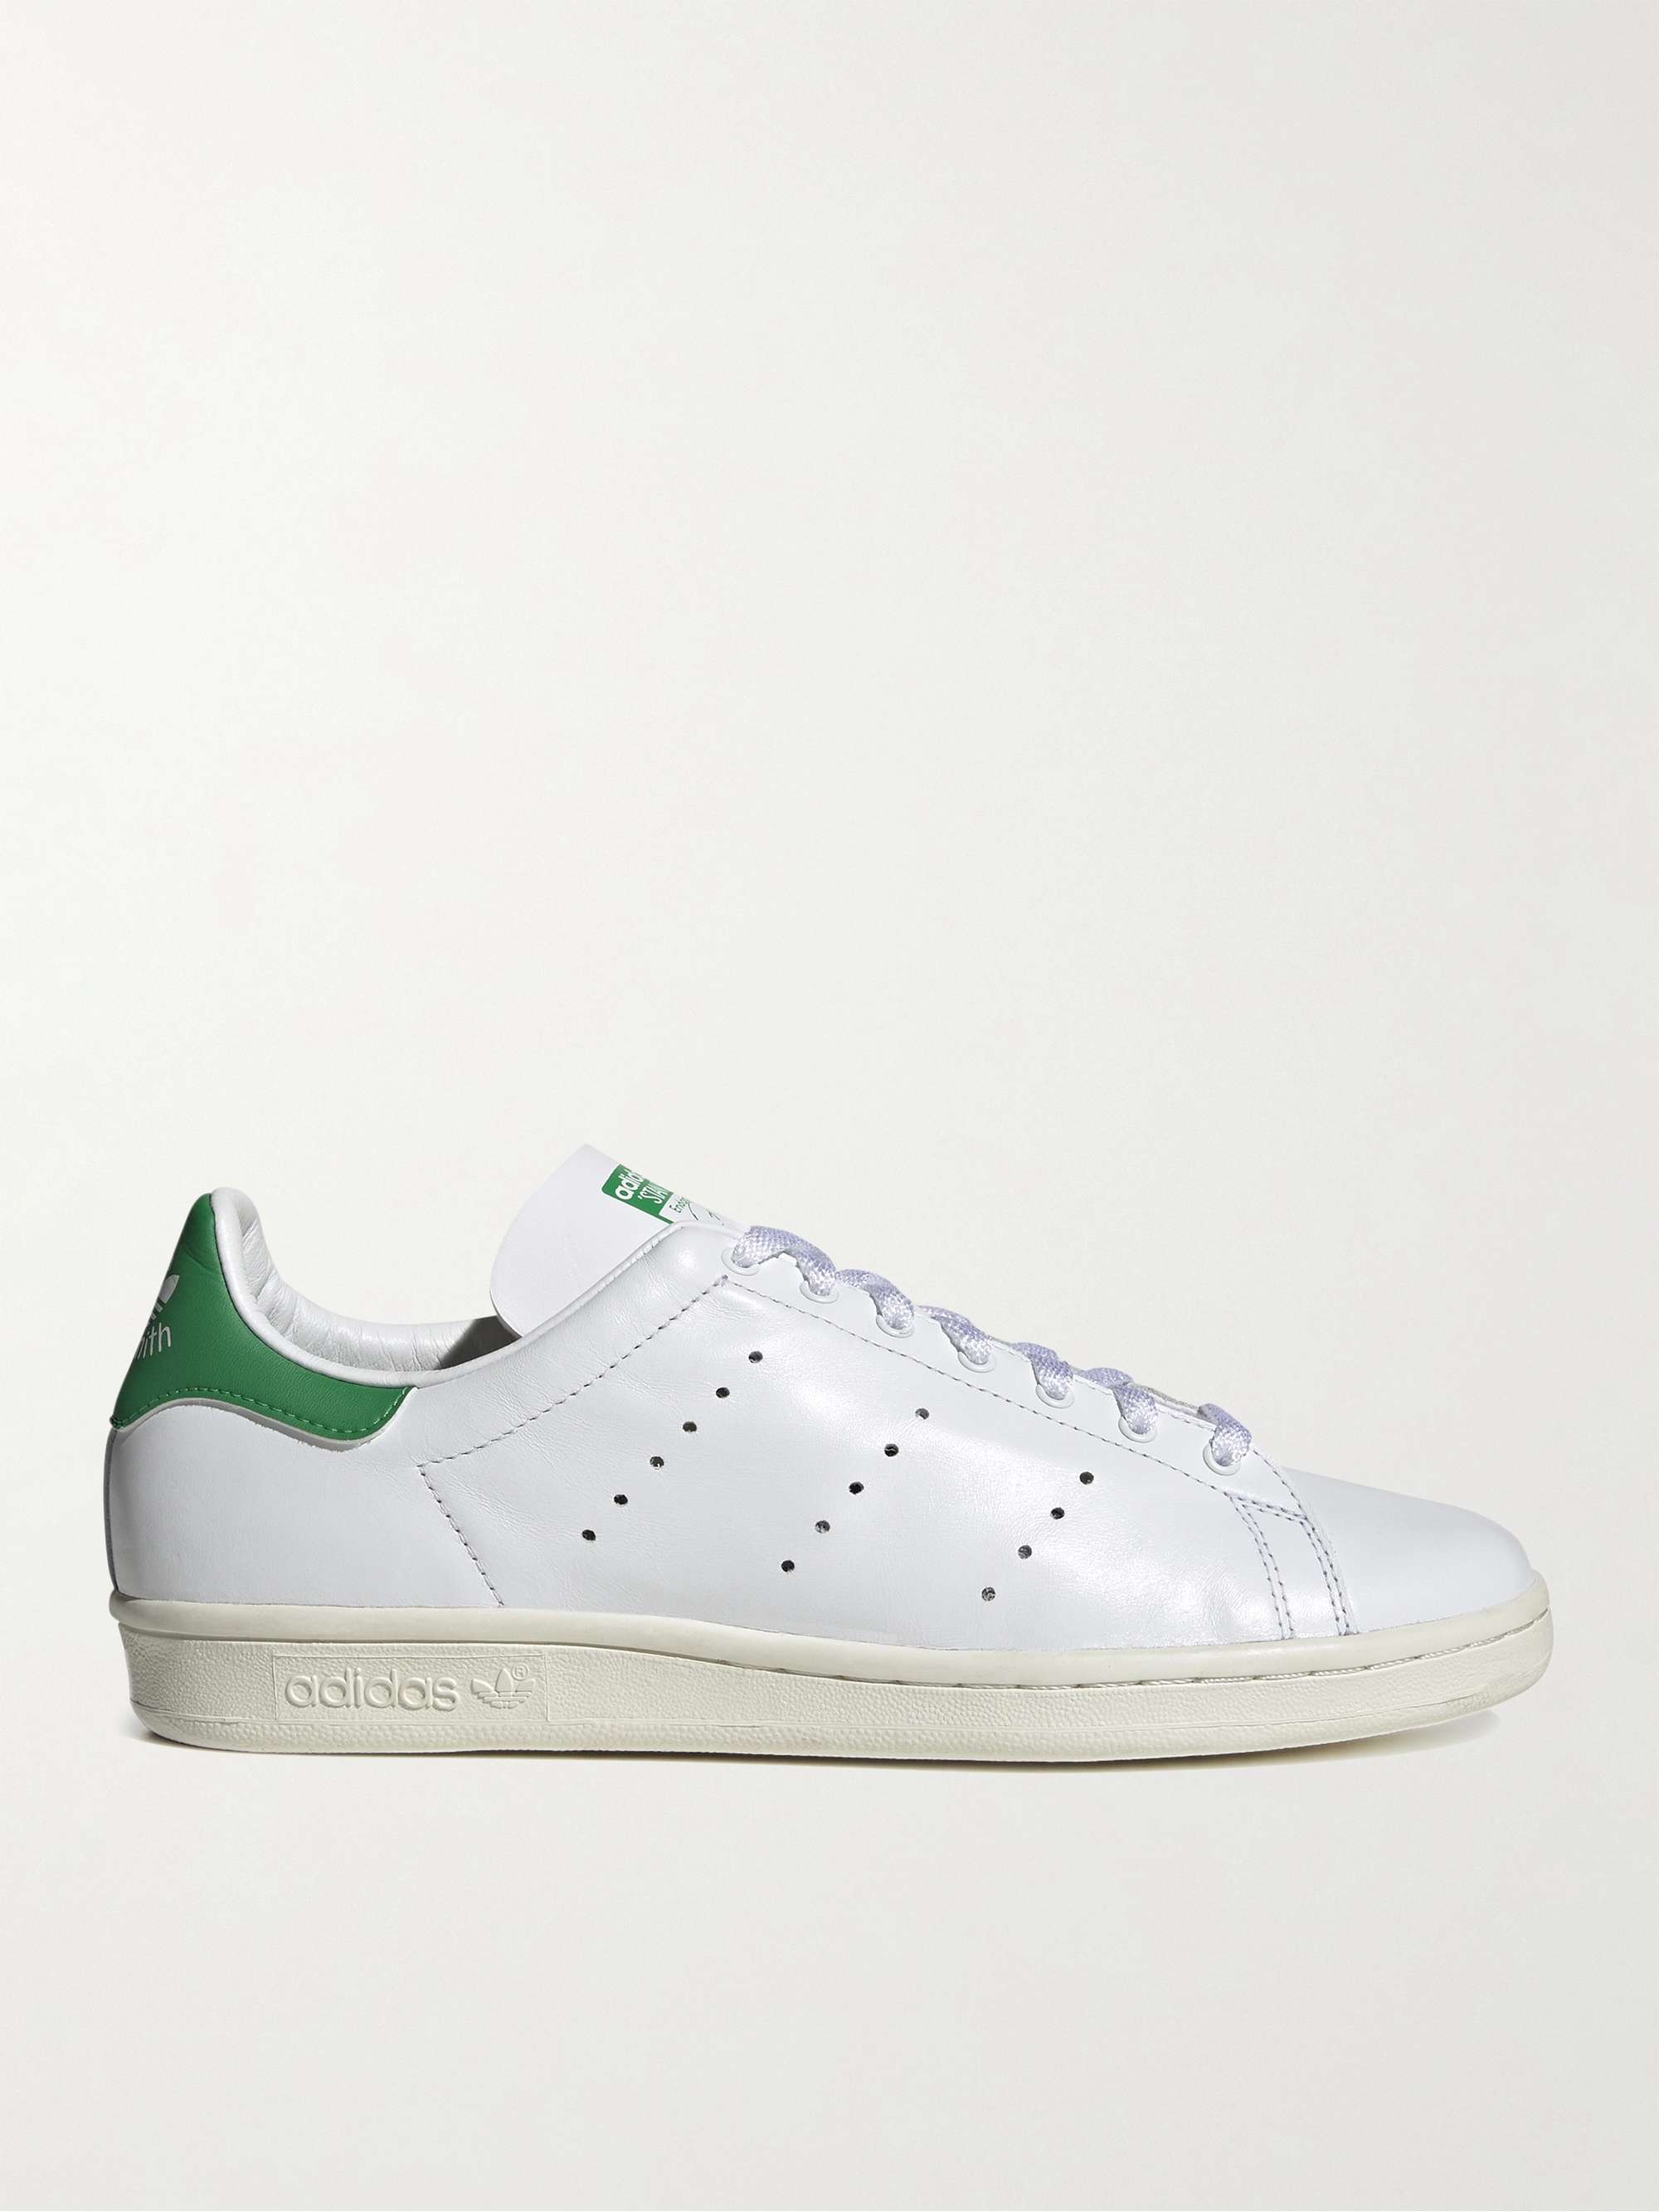 Stan Smith 80s Leather Sneakers